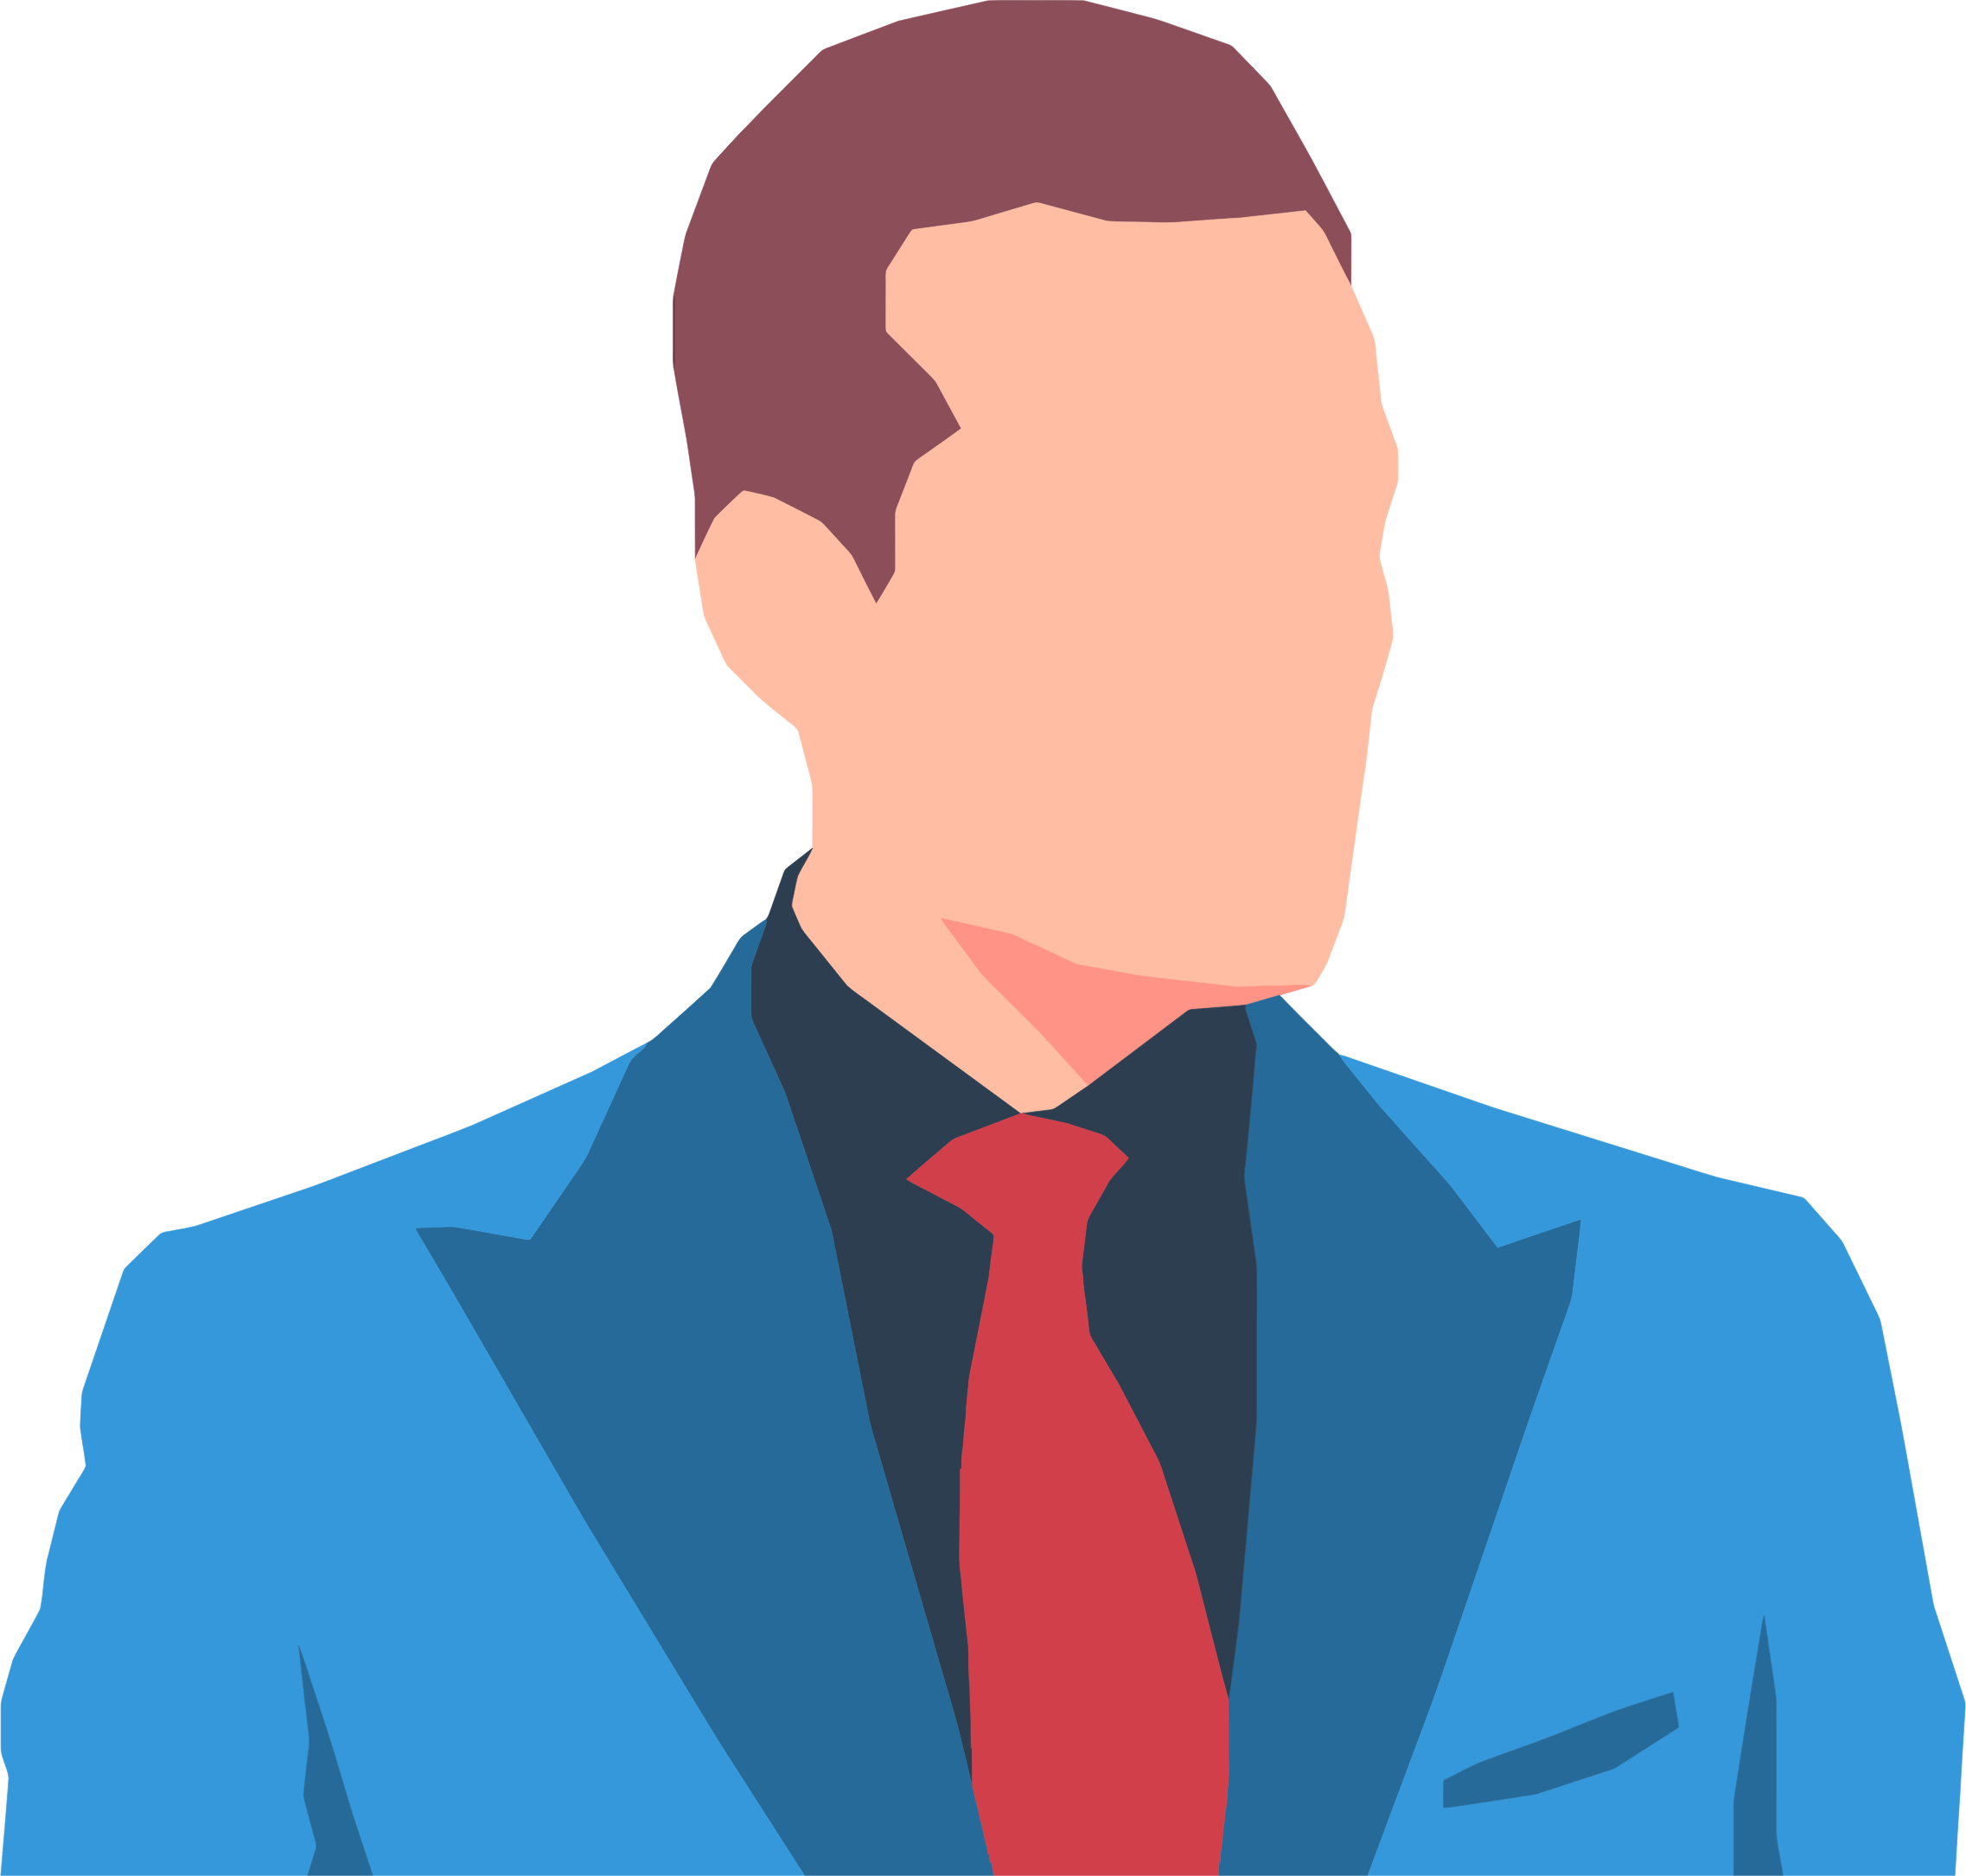 Faceless-Male-Avatar-In-Suit